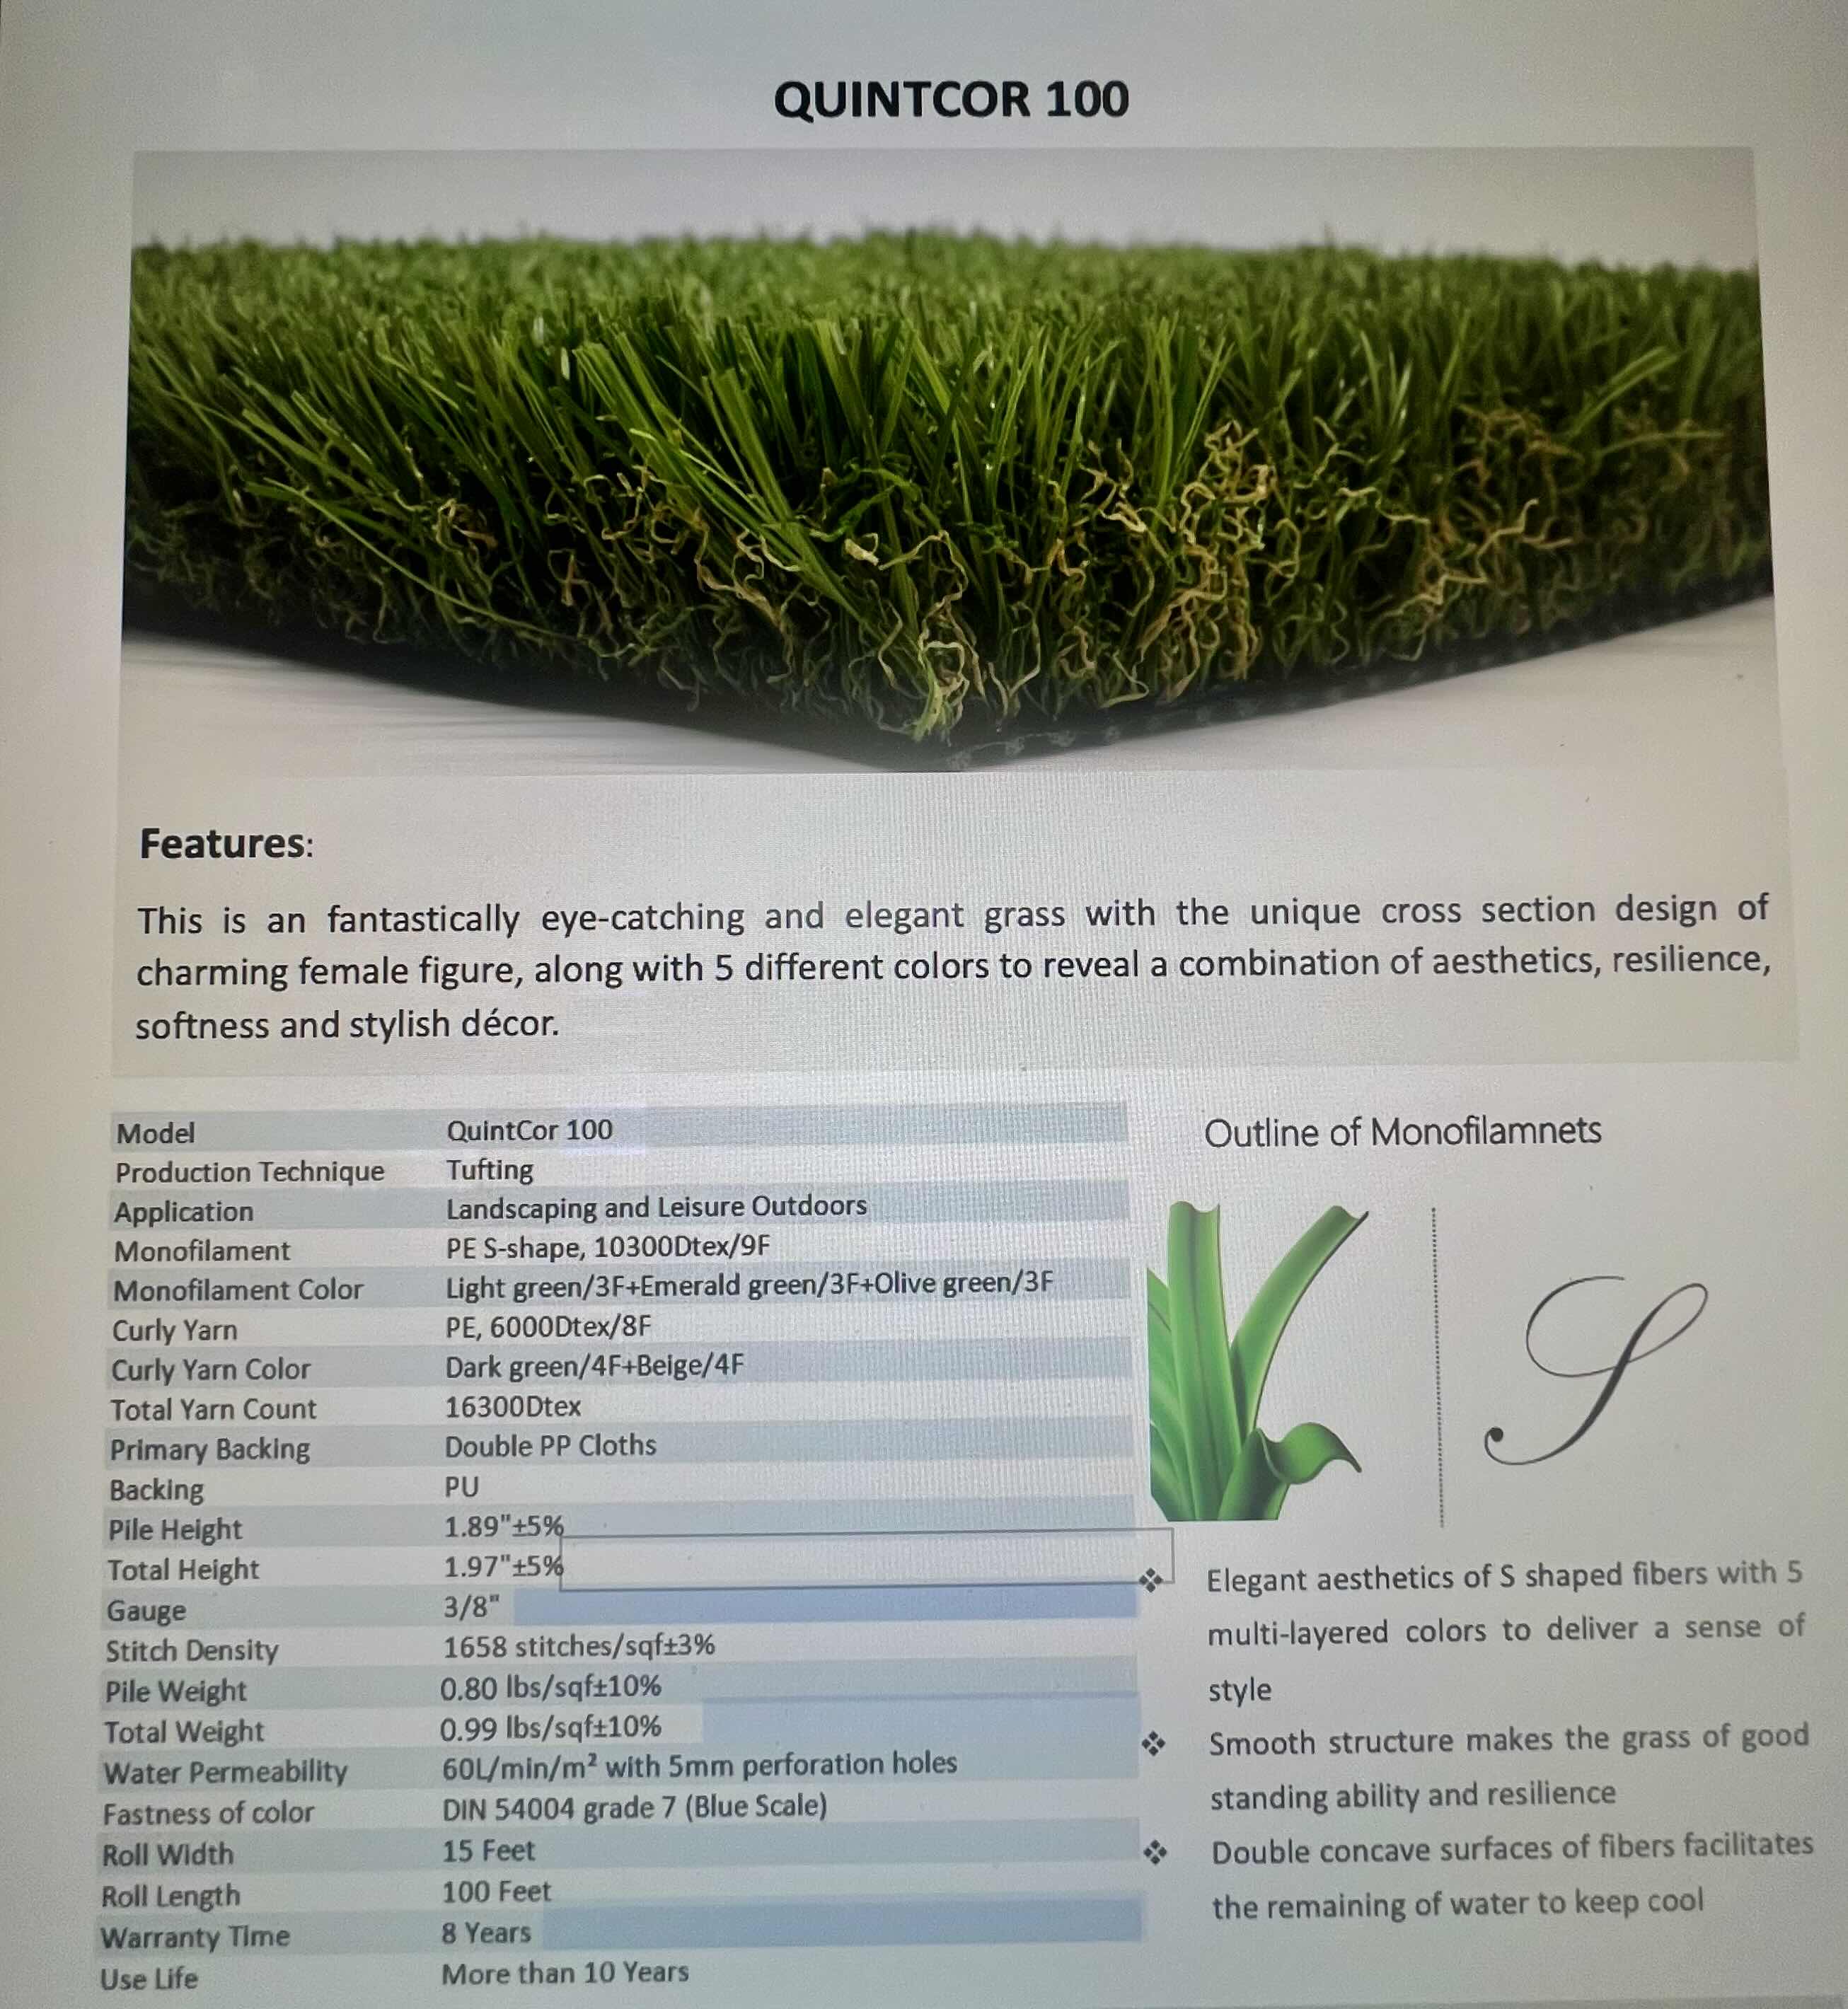 Photo 3 of SUPREME PREMIUM QUALITY ARTIFICIAL TURF GRASS 15’ X 100’ (1500 TOTAL SQ FT) ANTHEM COUNTRY CLUB APPROVED TOTAL TURF HEIGHT 1.97”(((pick-up Sun 5/26 AND Mon 5/27)))